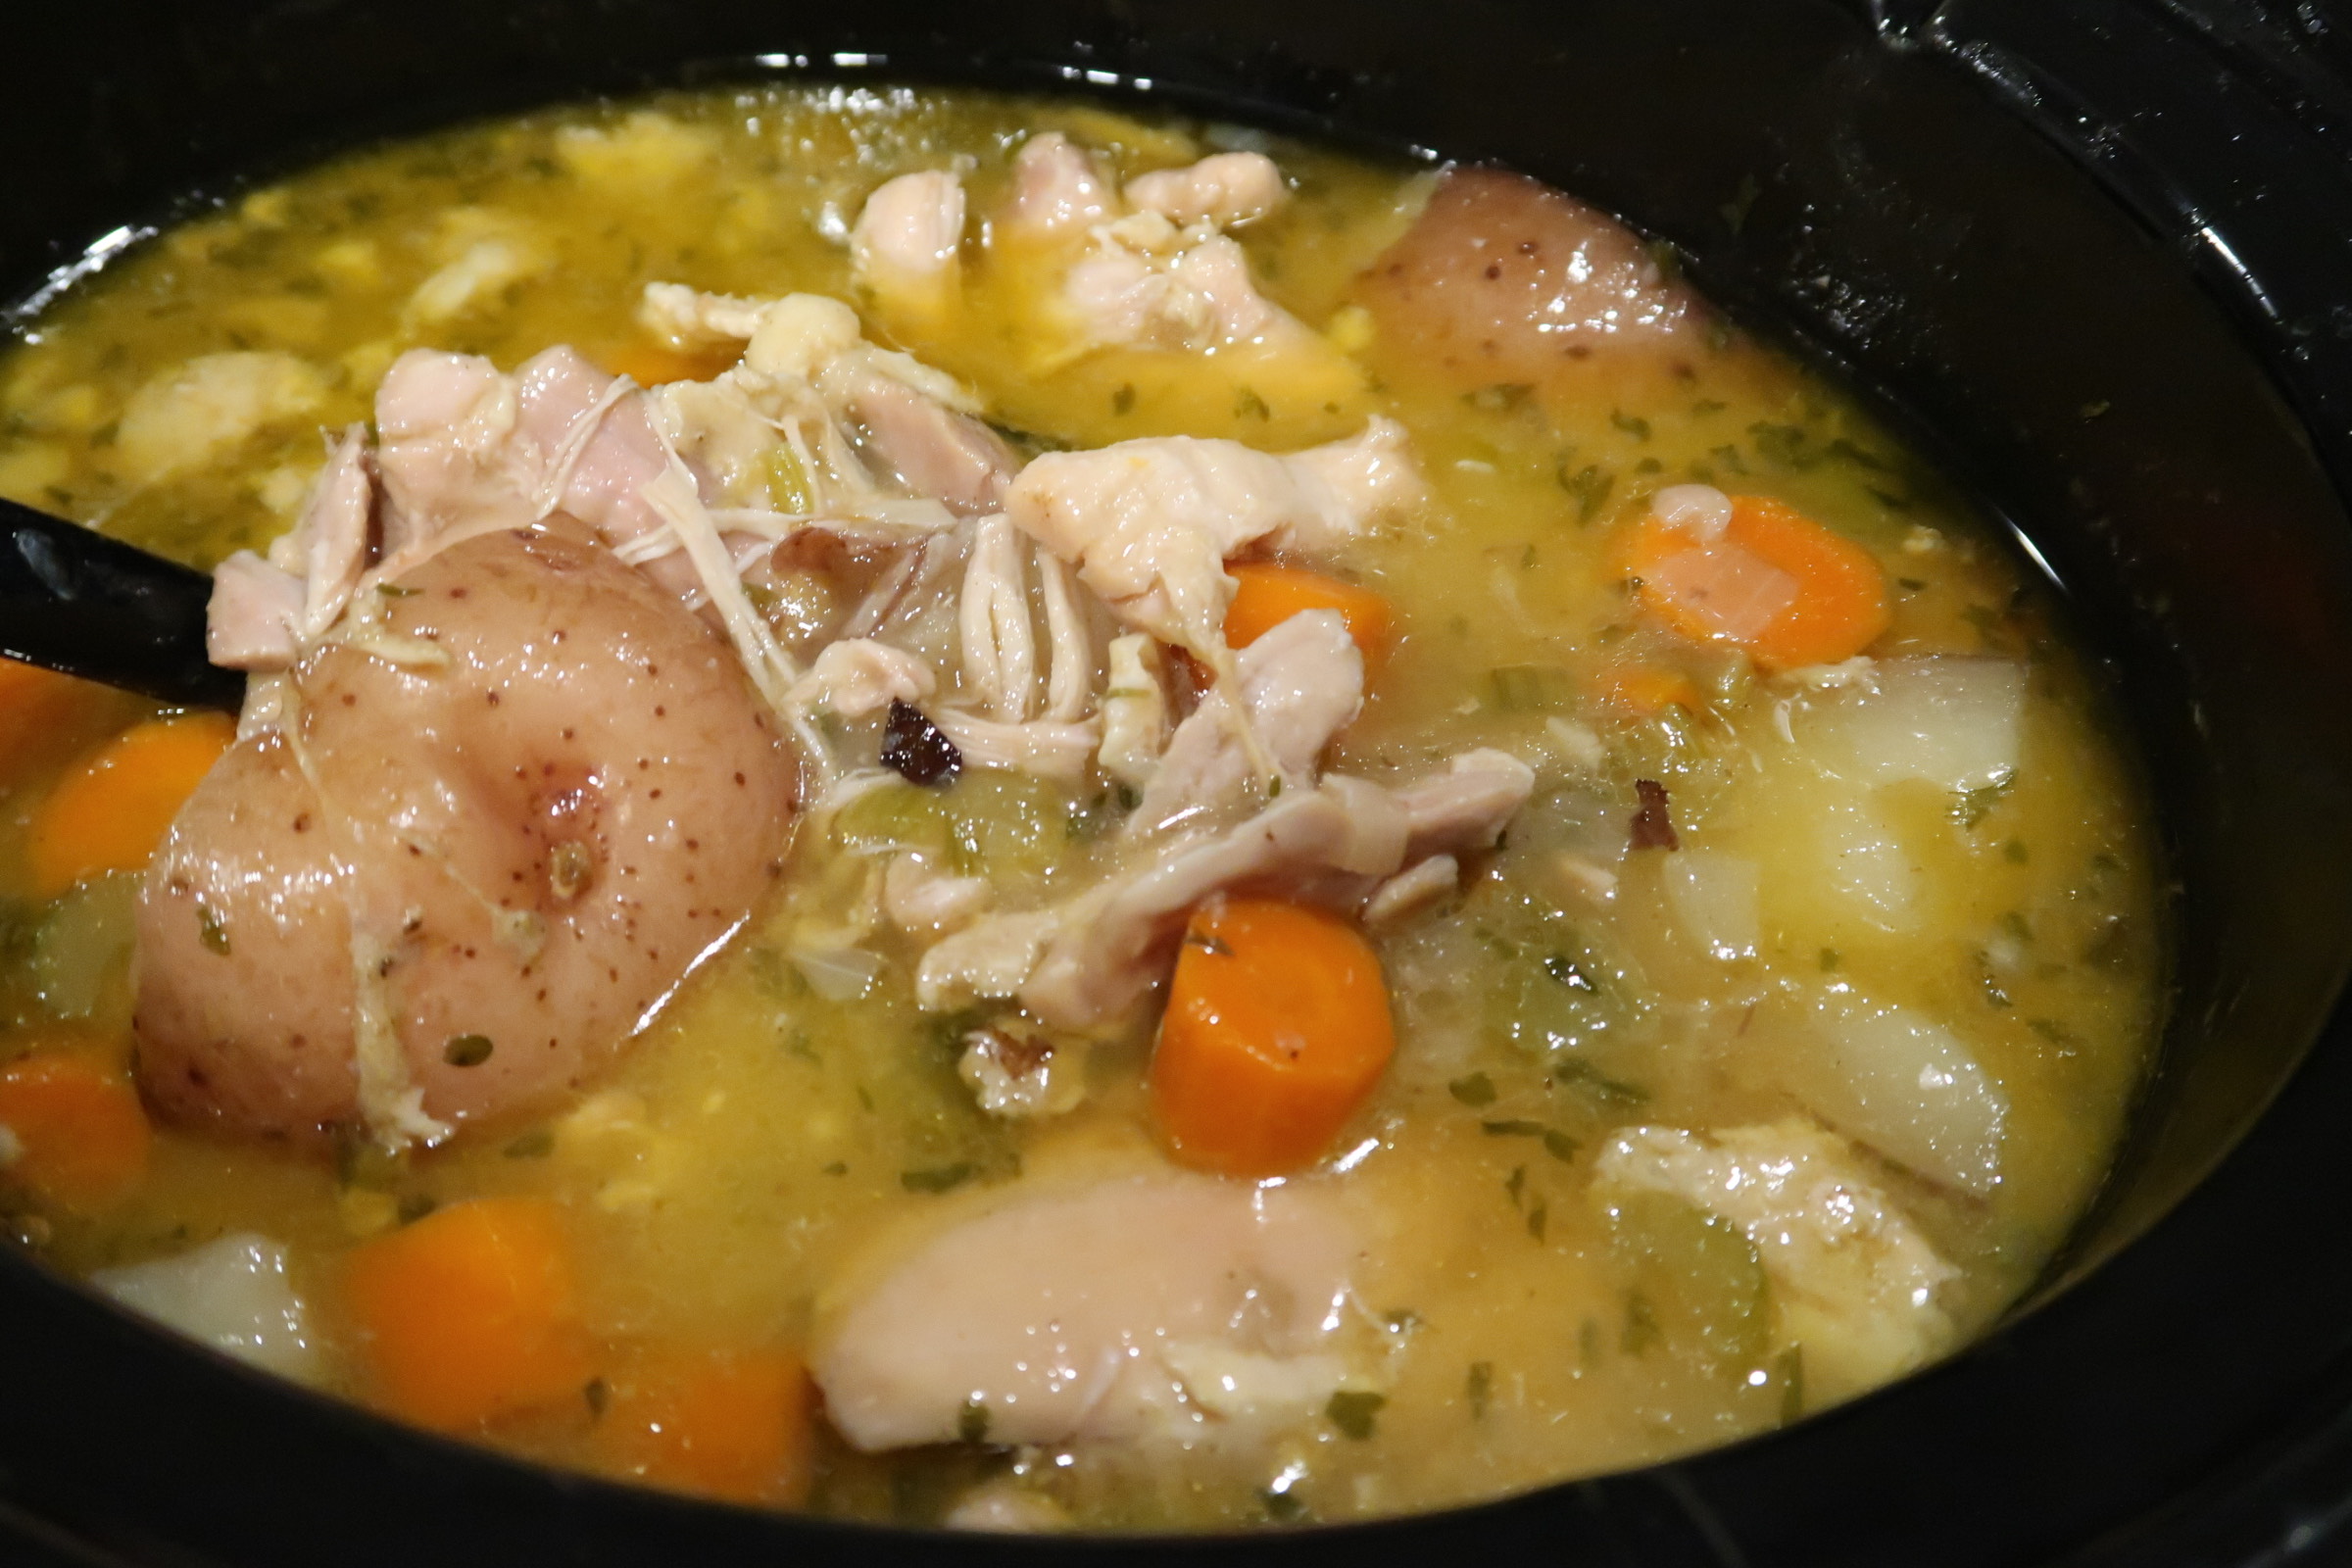 An overhead image of a full crockpot with homemade chicken stew. The stew is packed with vegetables like carrots and potatoes and tender chicken in an herby broth.